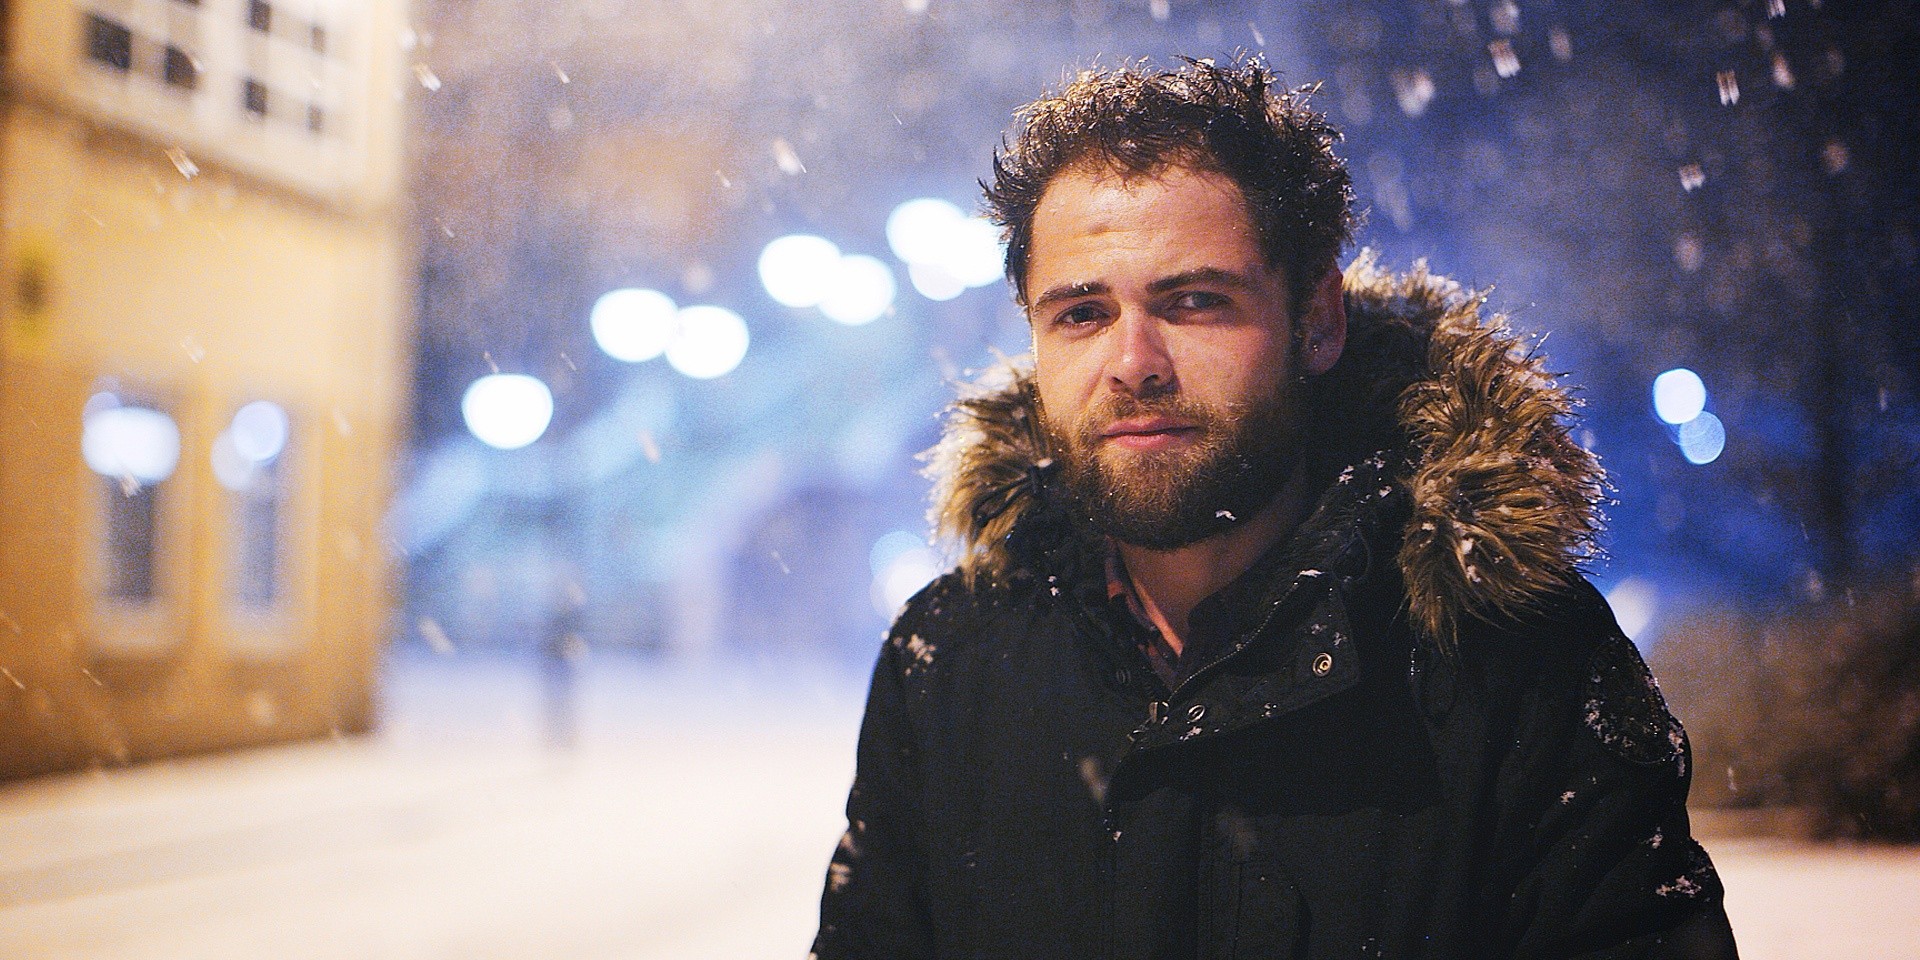 Passenger will not be performing in Manila, leaving Singapore as sole Southeast Asian date